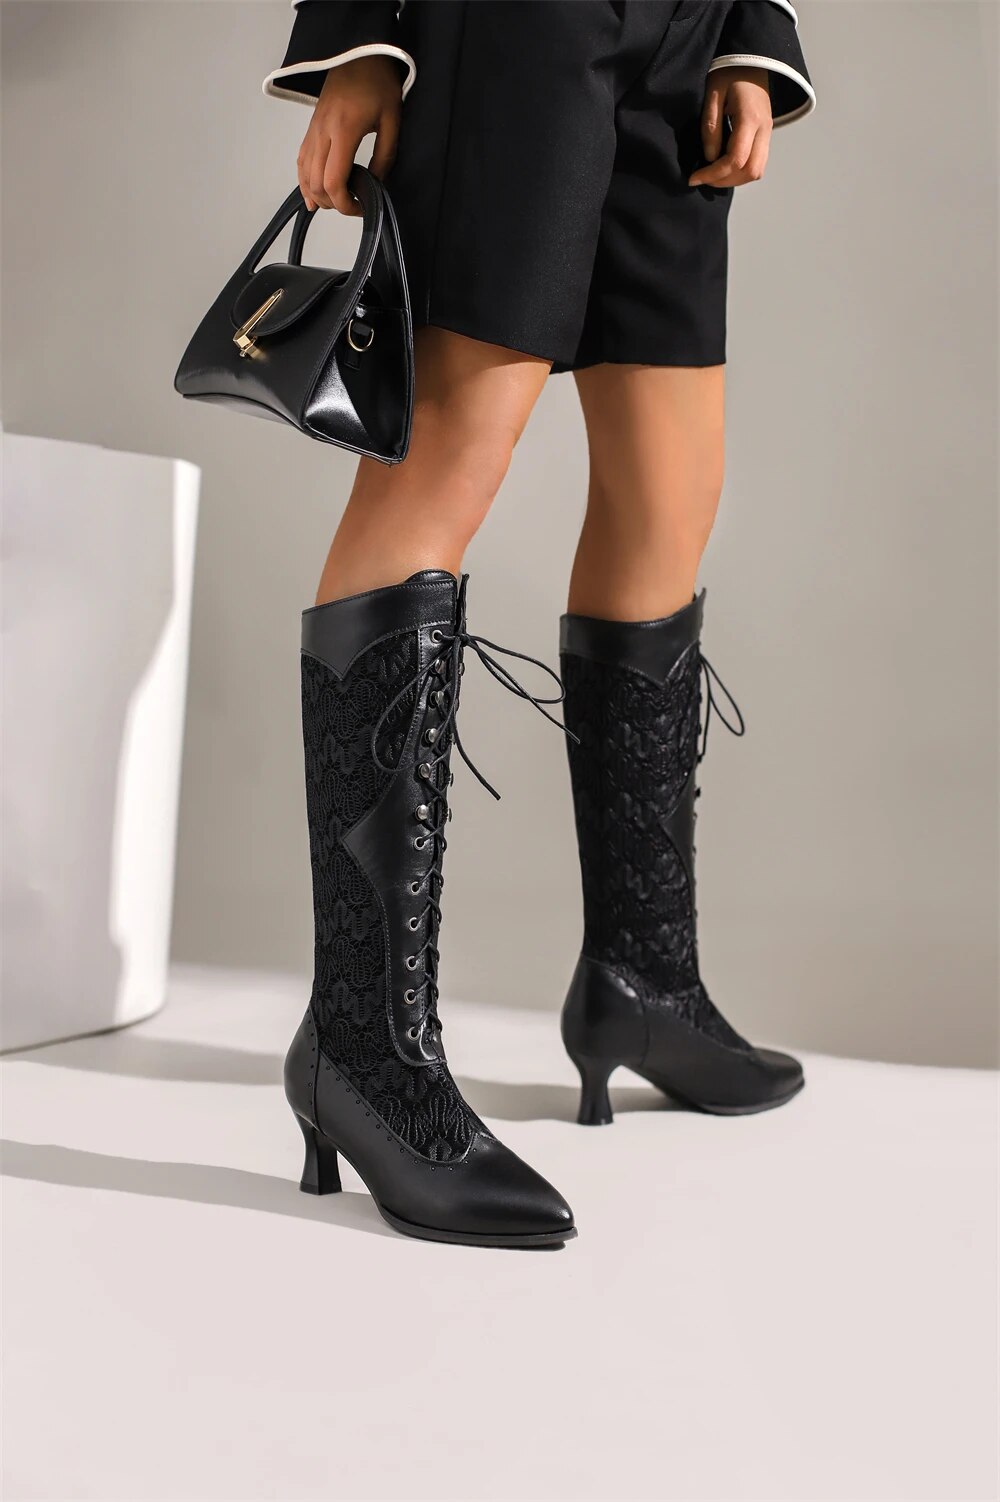 come4buy.com-Mid-Calf Boots Pointed Toe pro Women